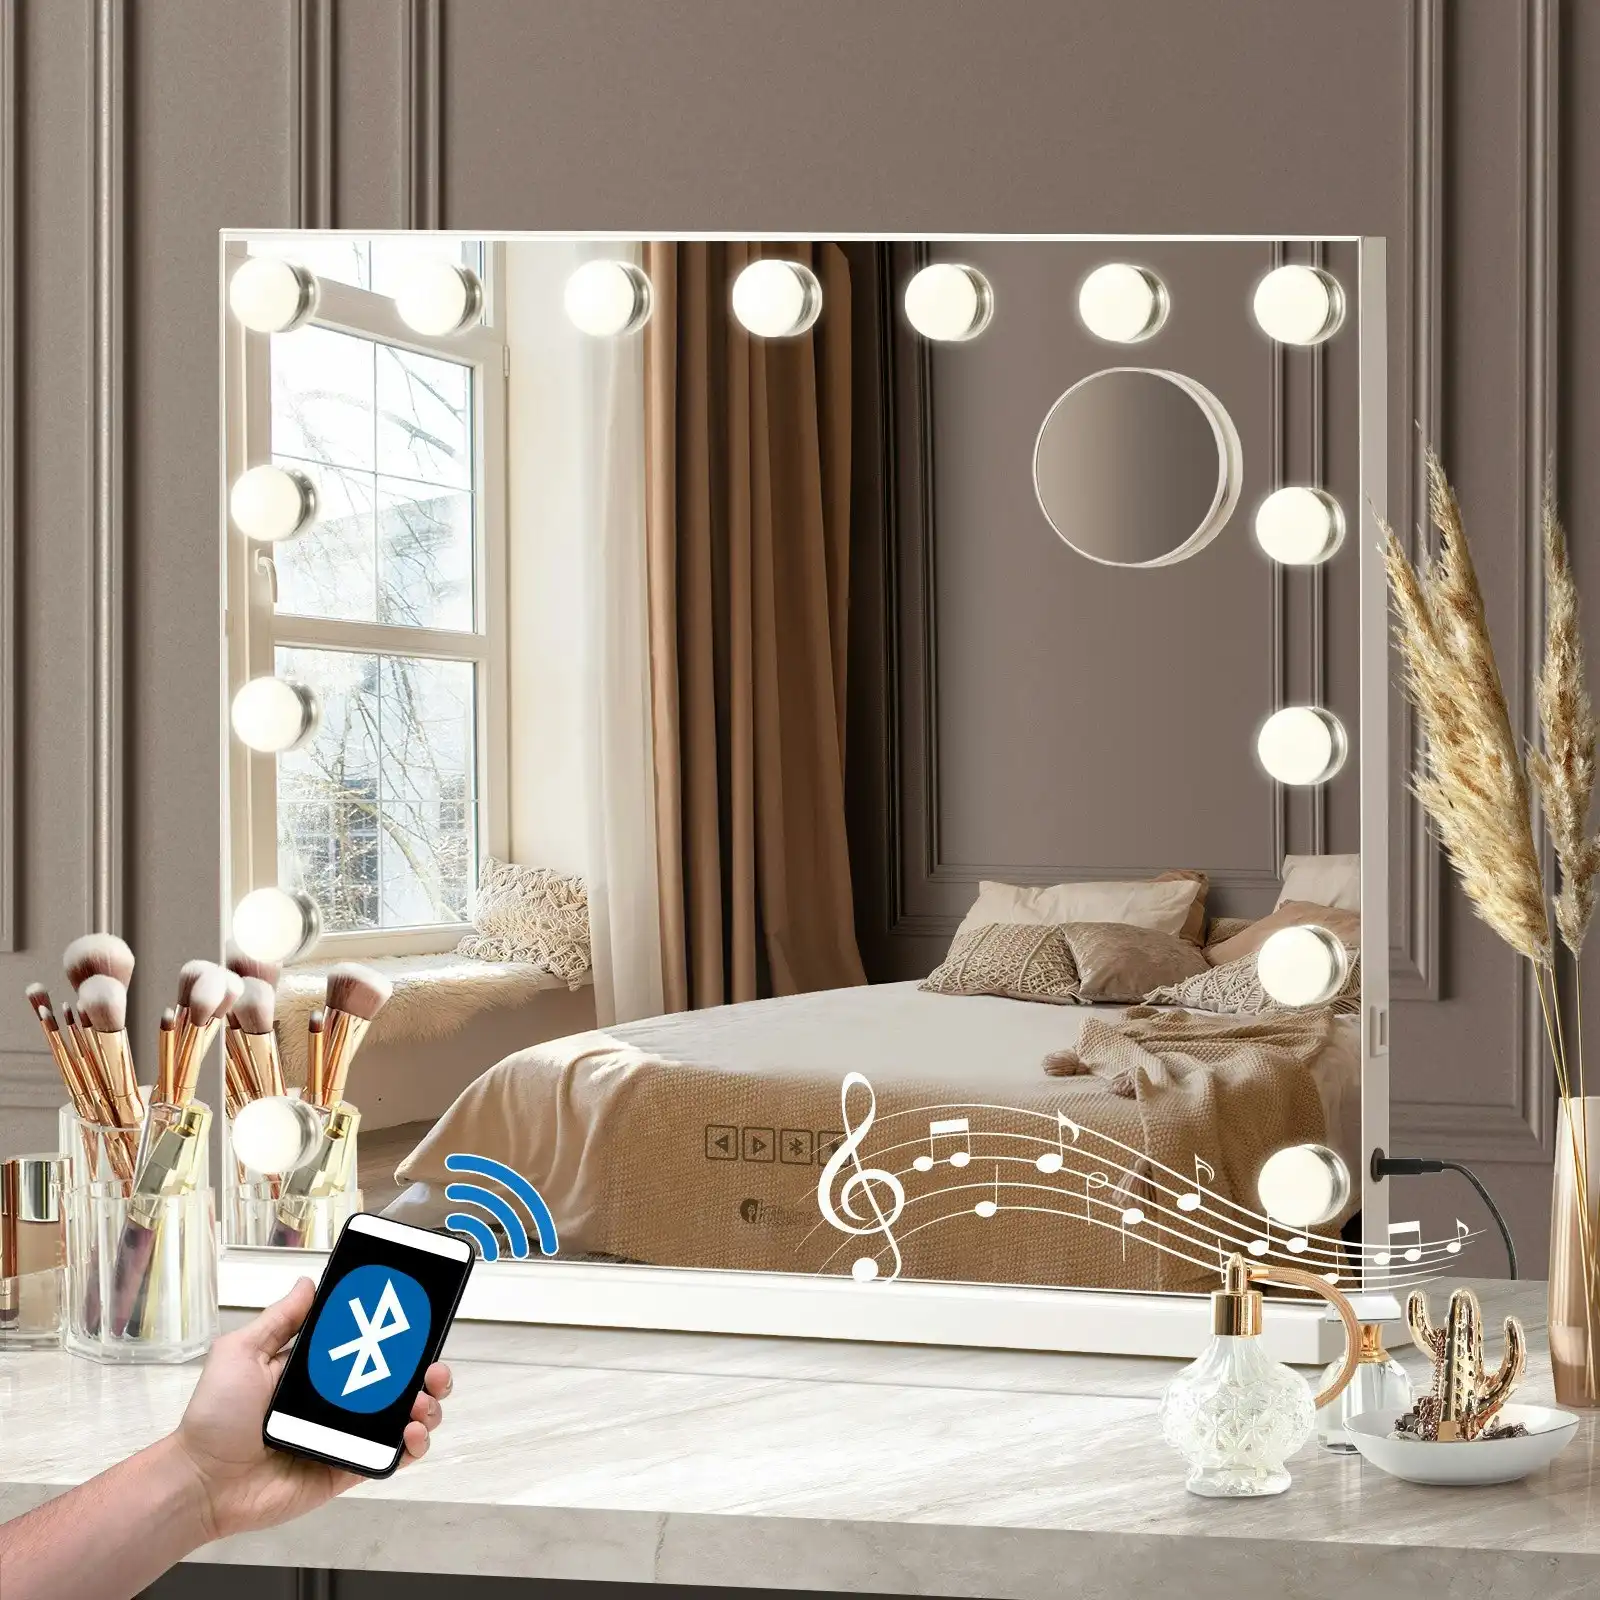 Oikiture 60x52cm Makeup Mirror Bluetooth Hollywood LED Light Vanity Mirrors Standing Wall Mounted